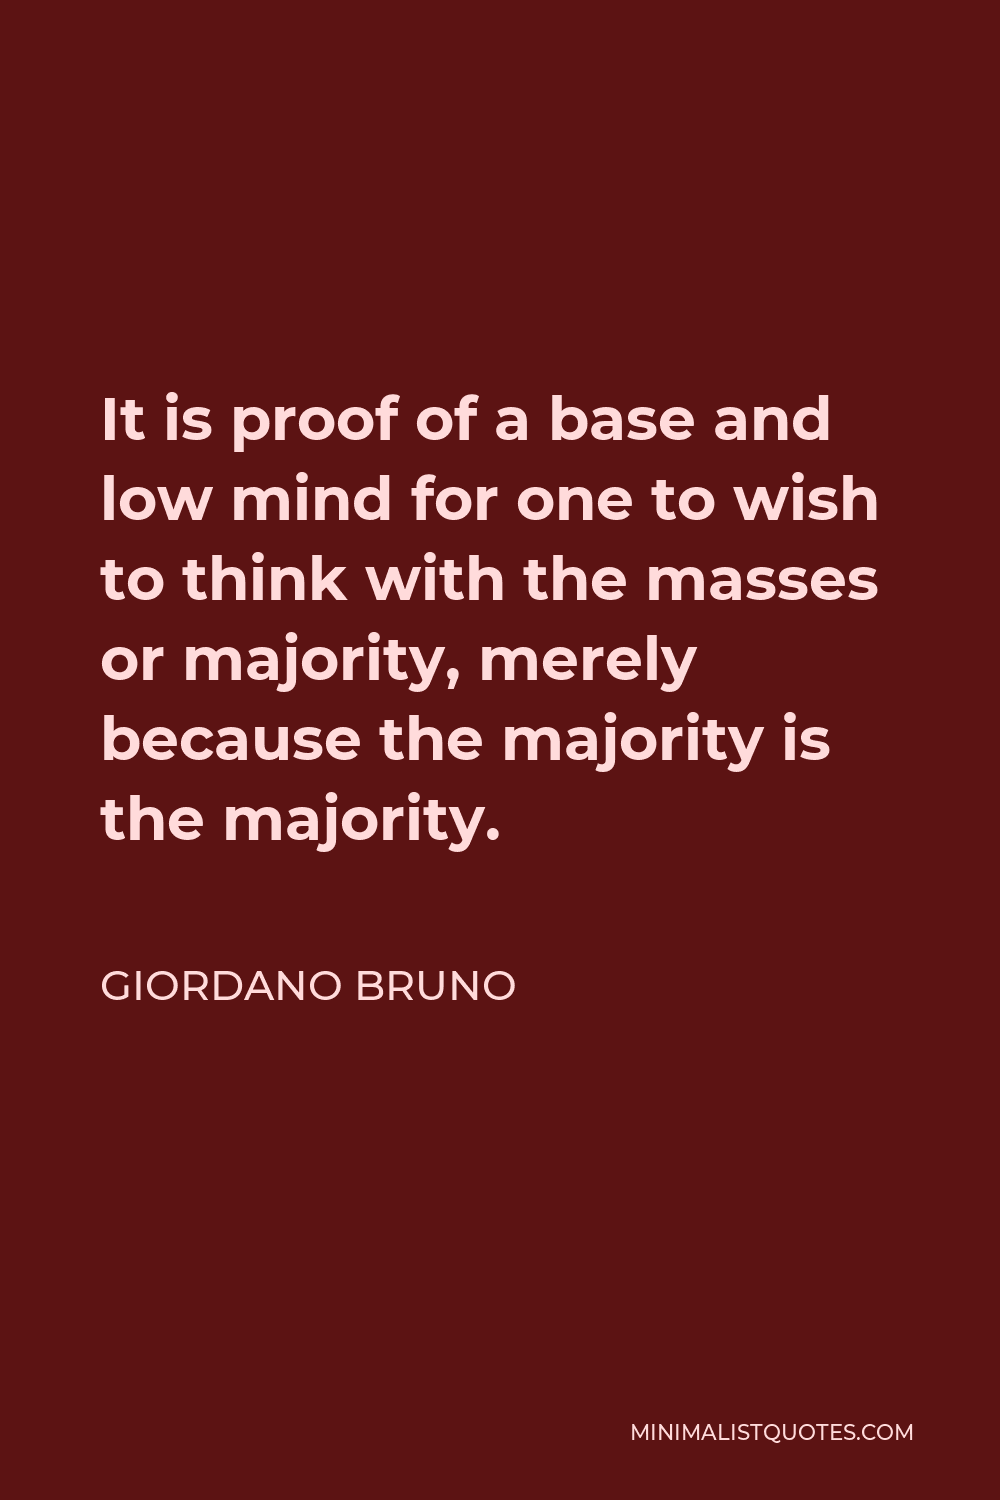 Giordano Bruno Quote - It is proof of a base and low mind for one to wish to think with the masses or majority, merely because the majority is the majority.